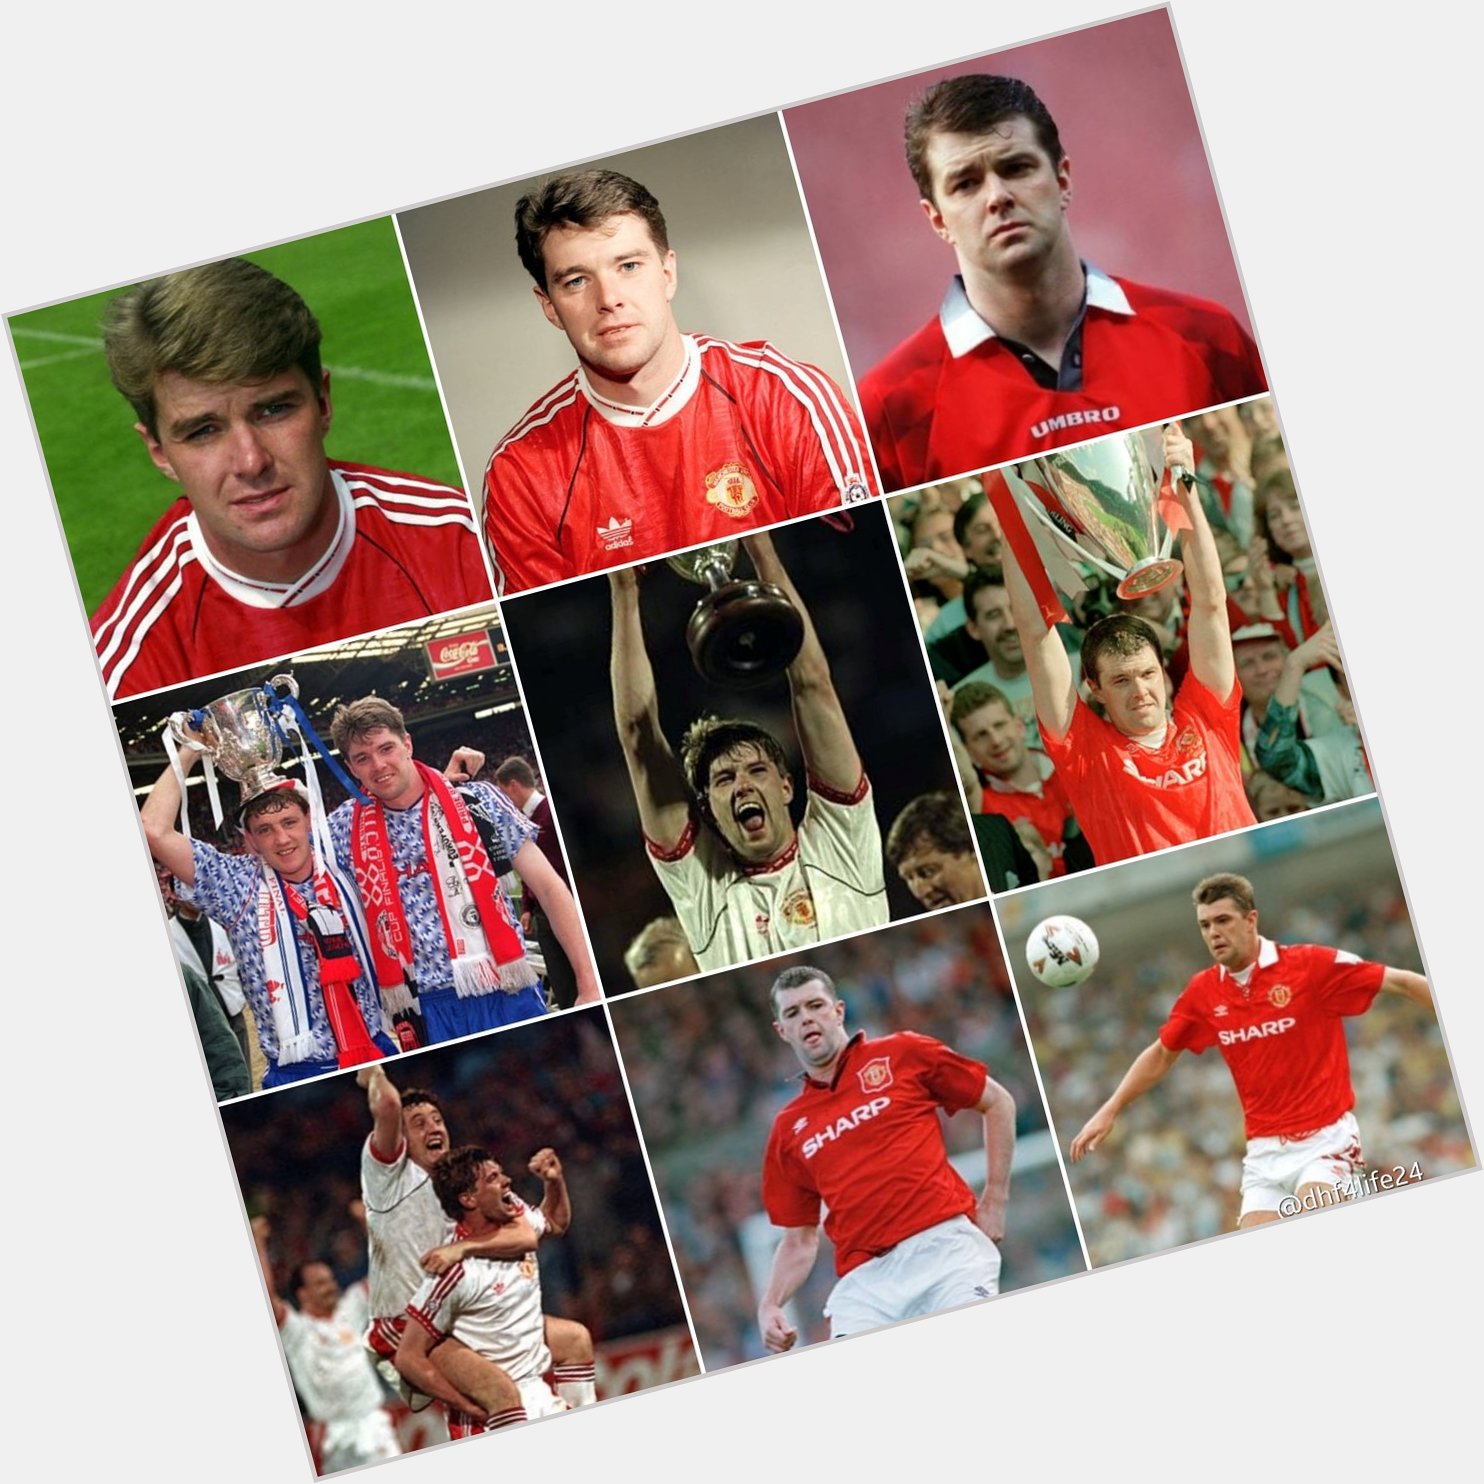 Happy 57th Birthday   on 30th June 2022 to Gary Pallister - What a Player and LEGEND... 